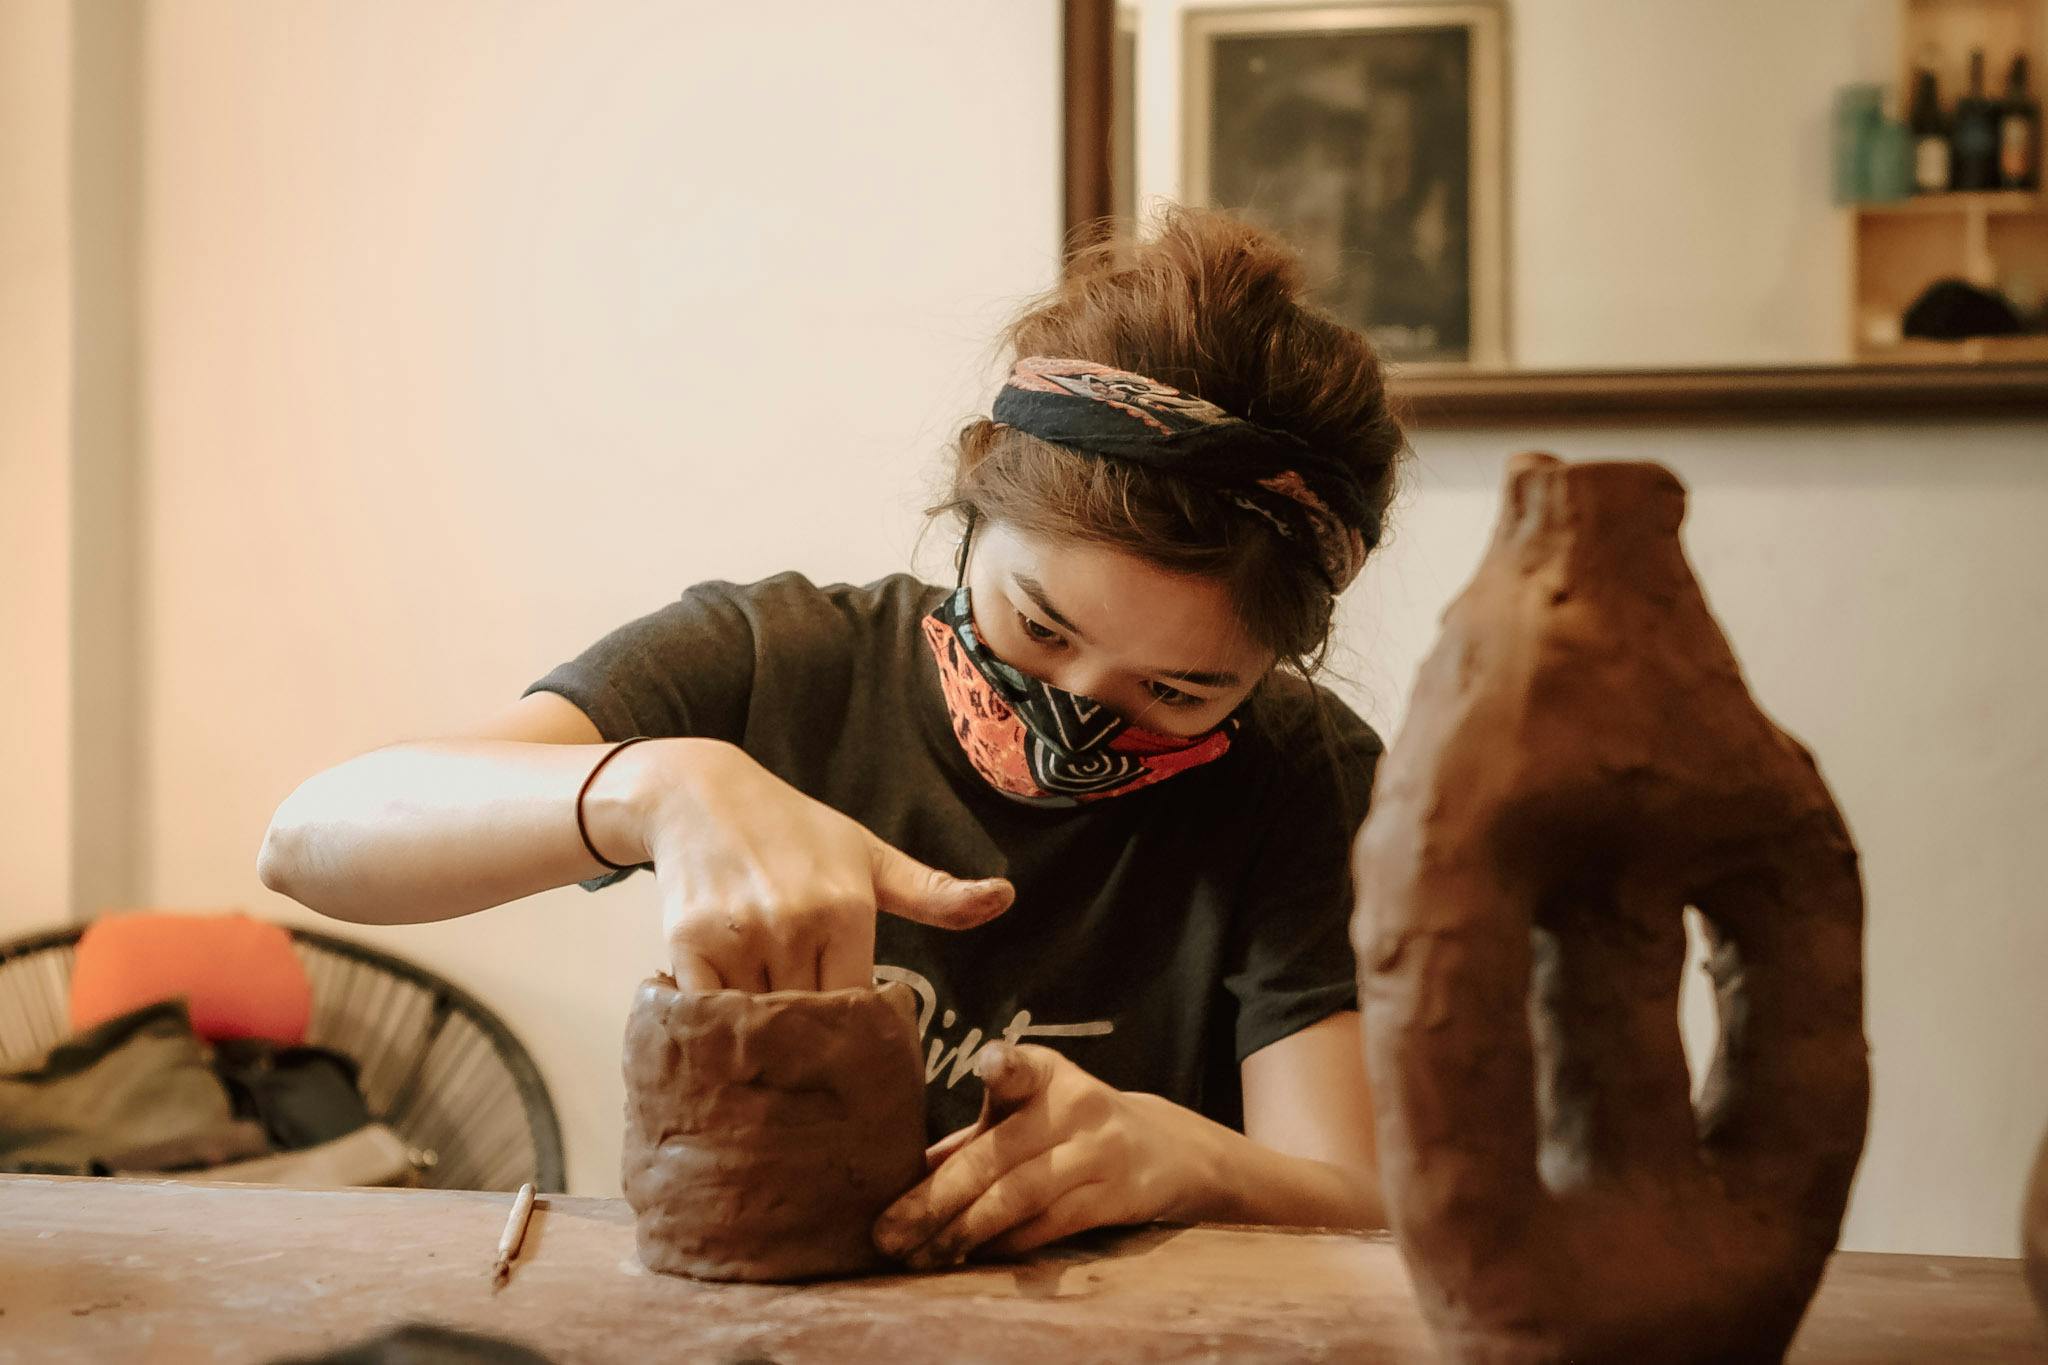 Learn Pottery from the makers of fine ceramics at Dirty Hands Only